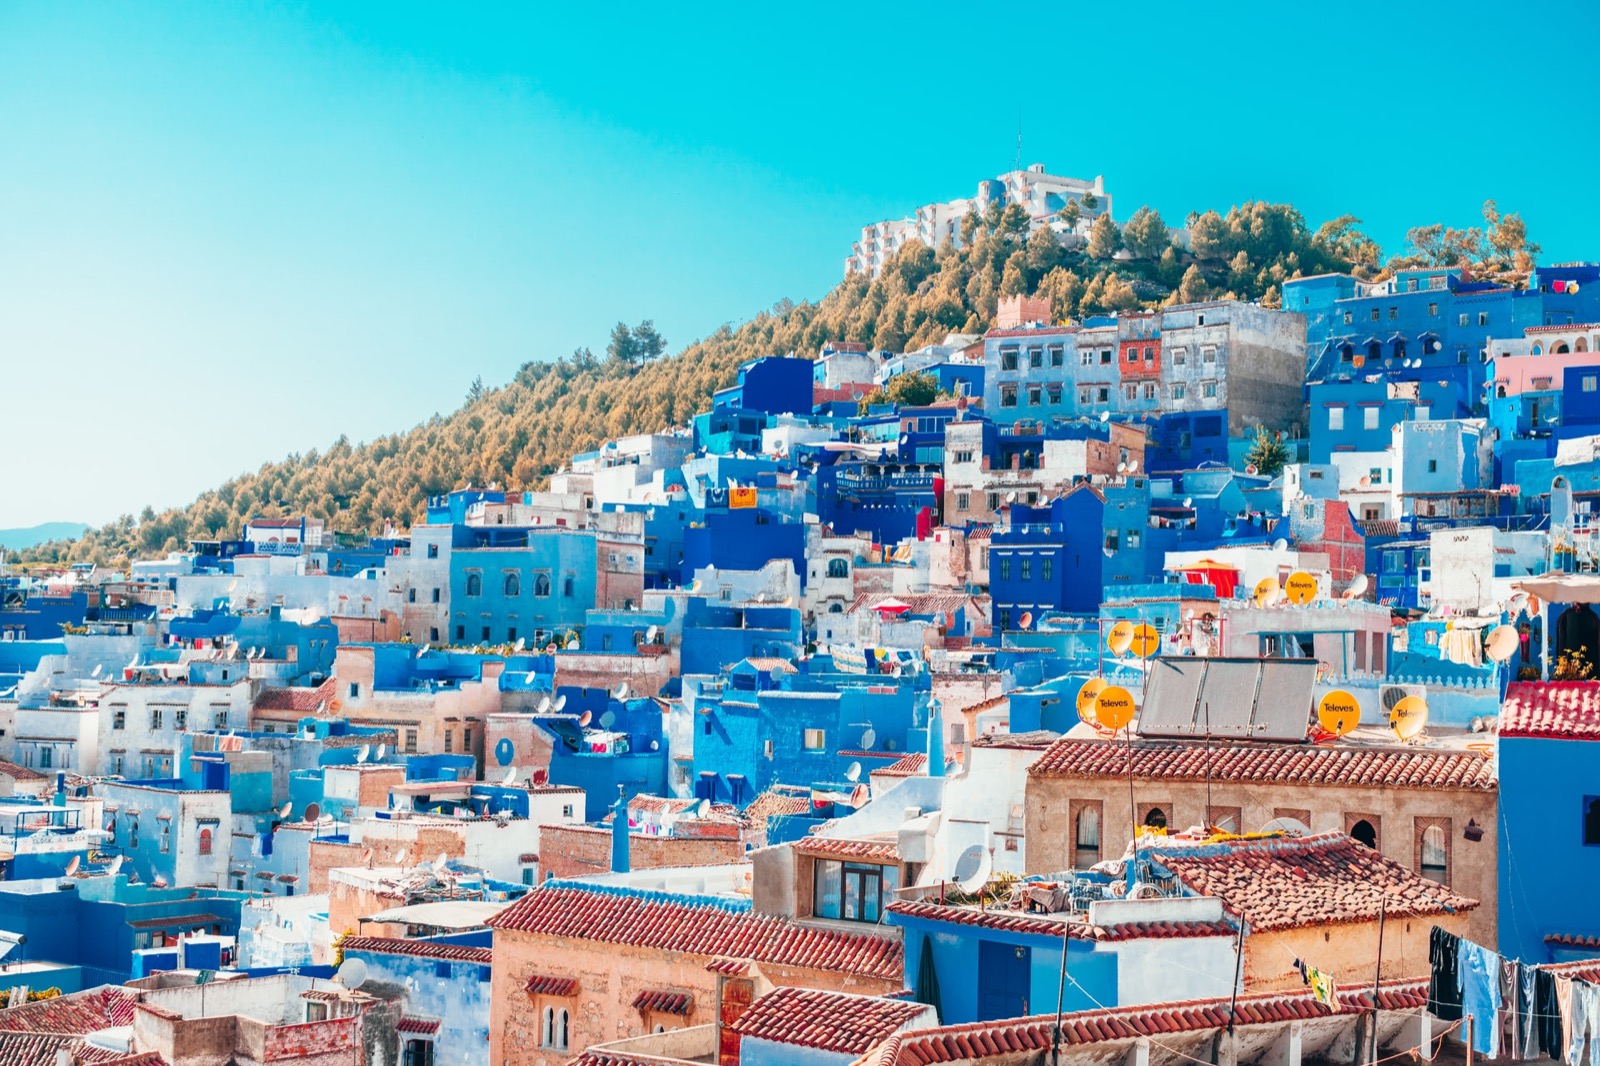 Unfortunately, Most People Will Struggle to Locate These Countries — Can You Get 17/25? Chefchaouen, Morocco